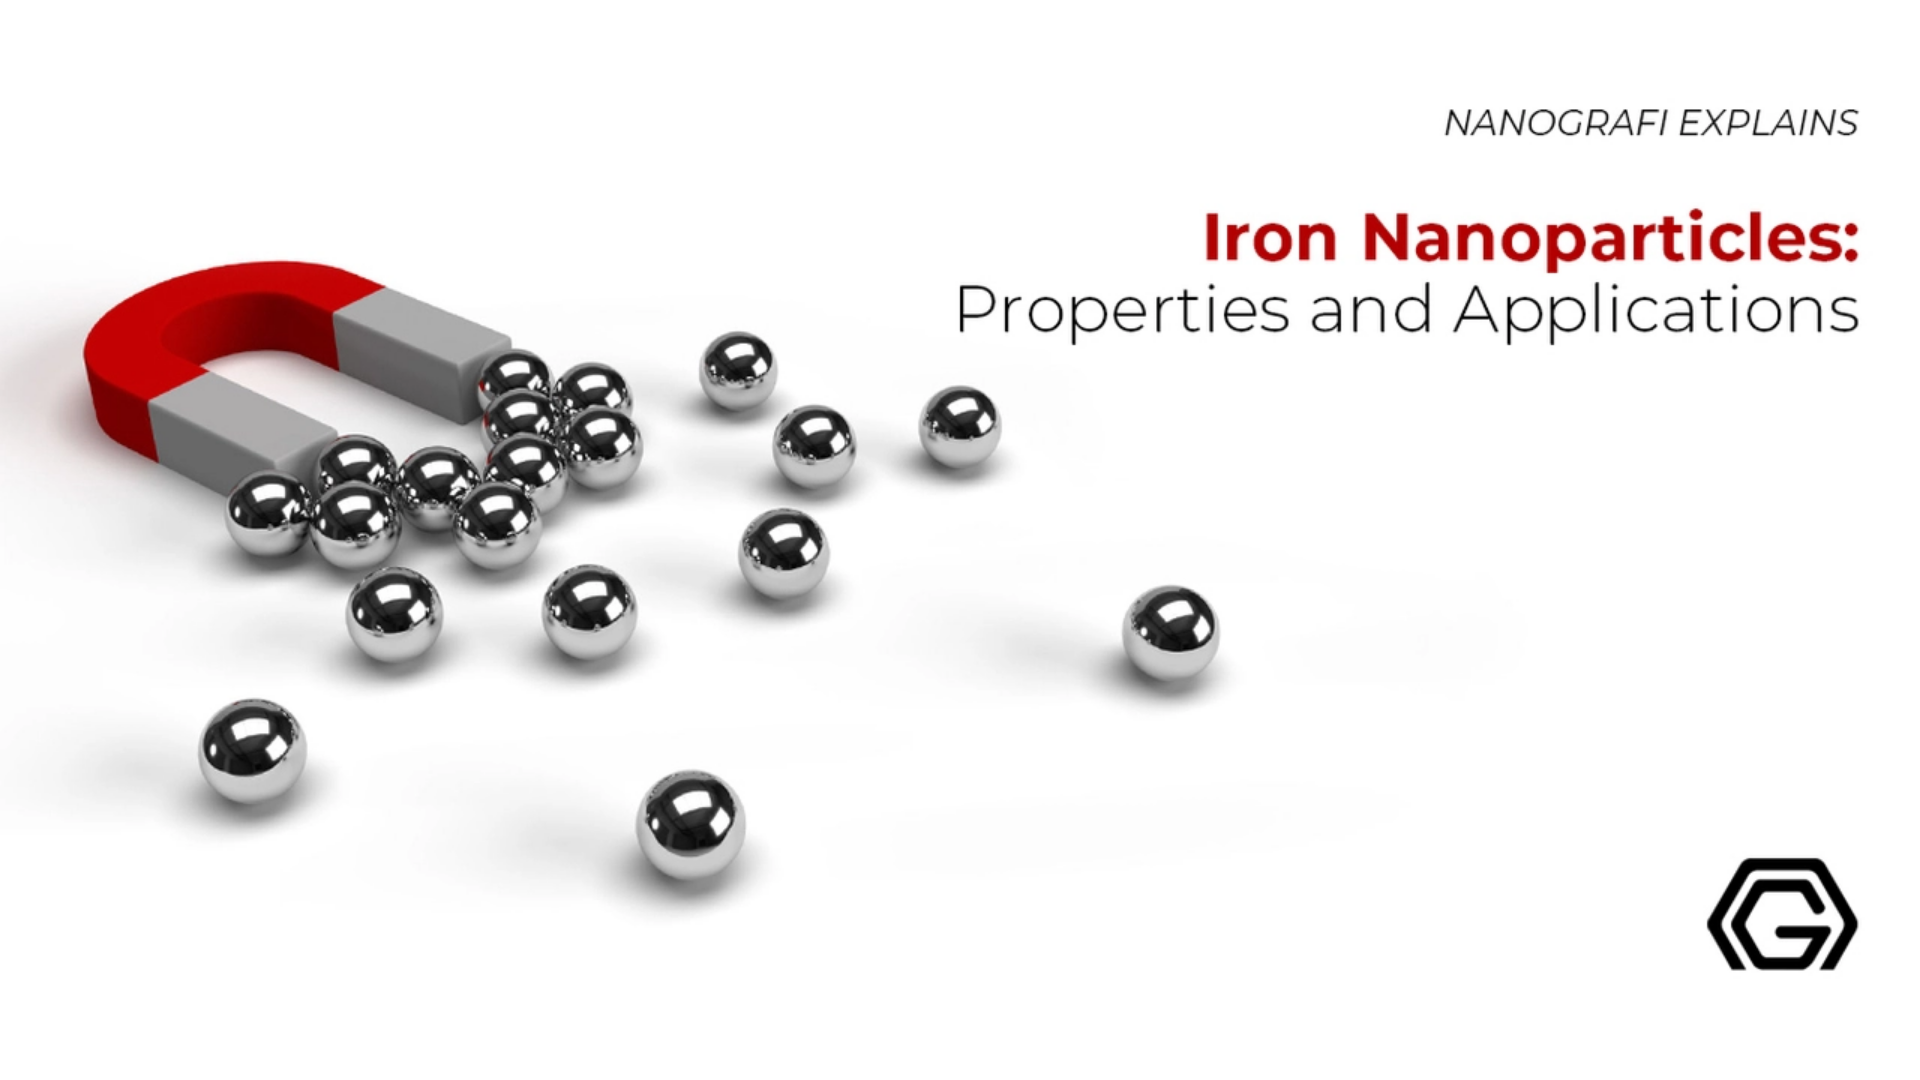 Iron nanoparticles: properties and applications